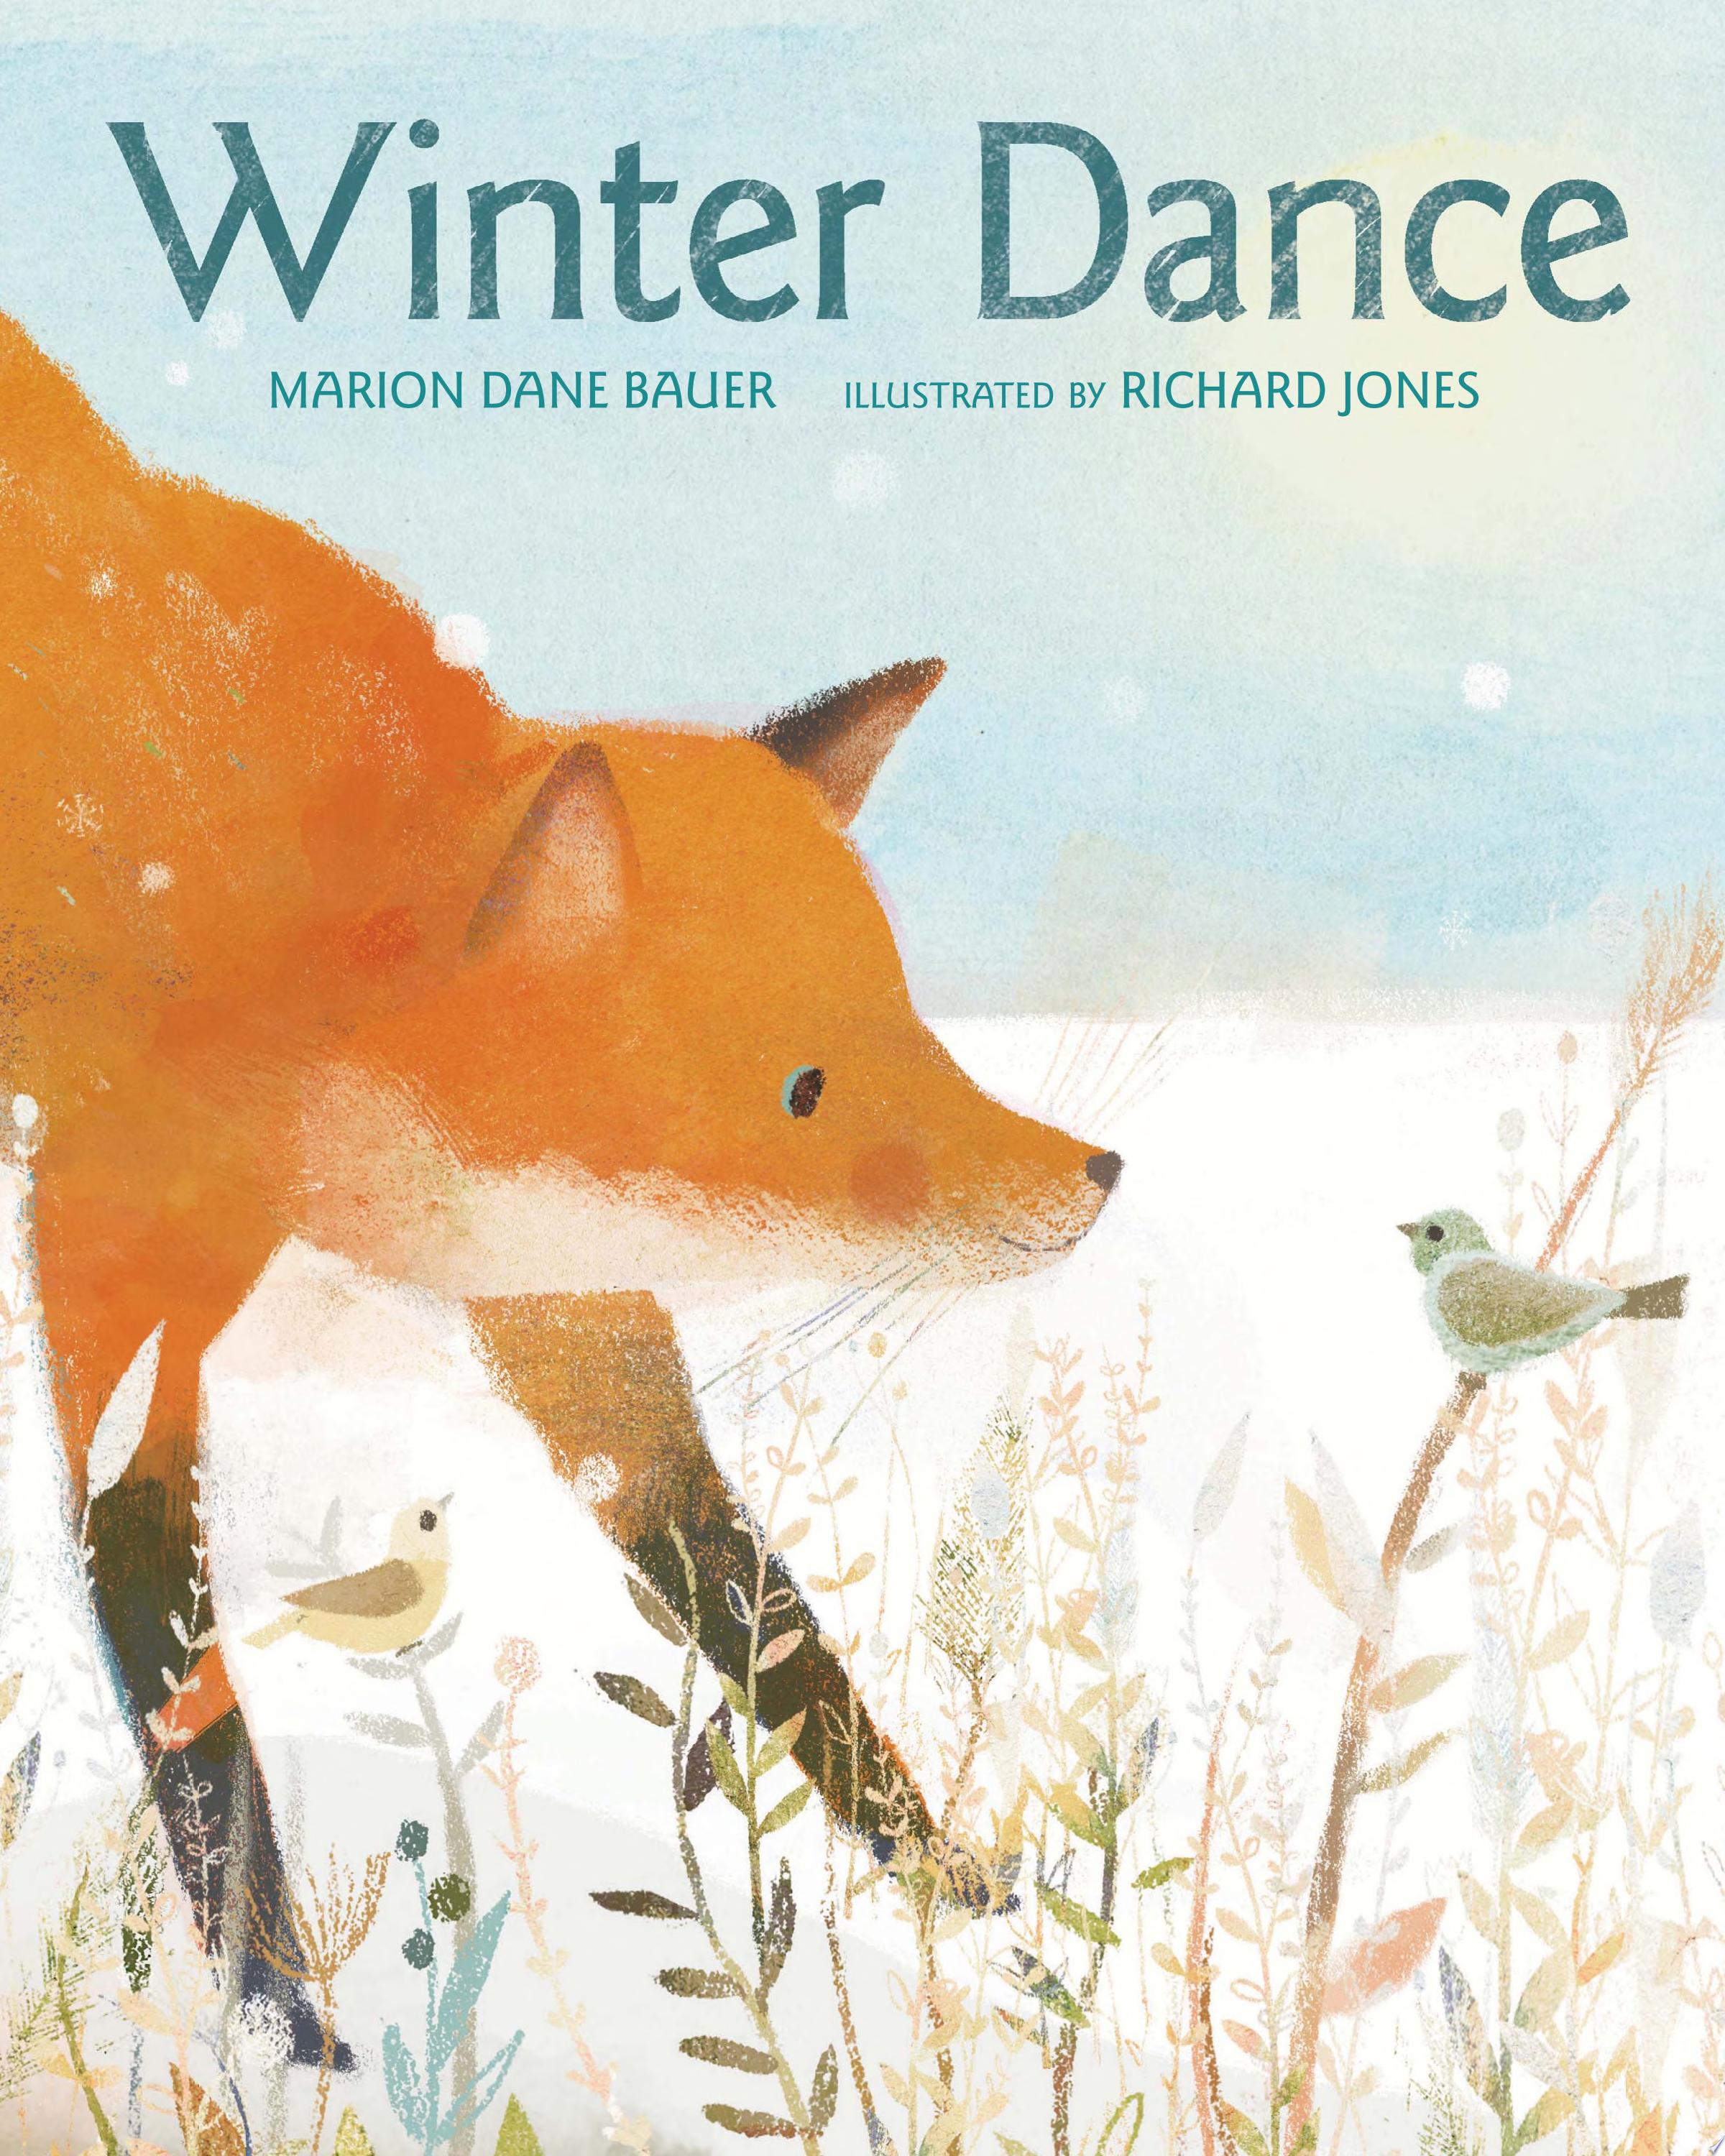 Image for "Winter Dance"